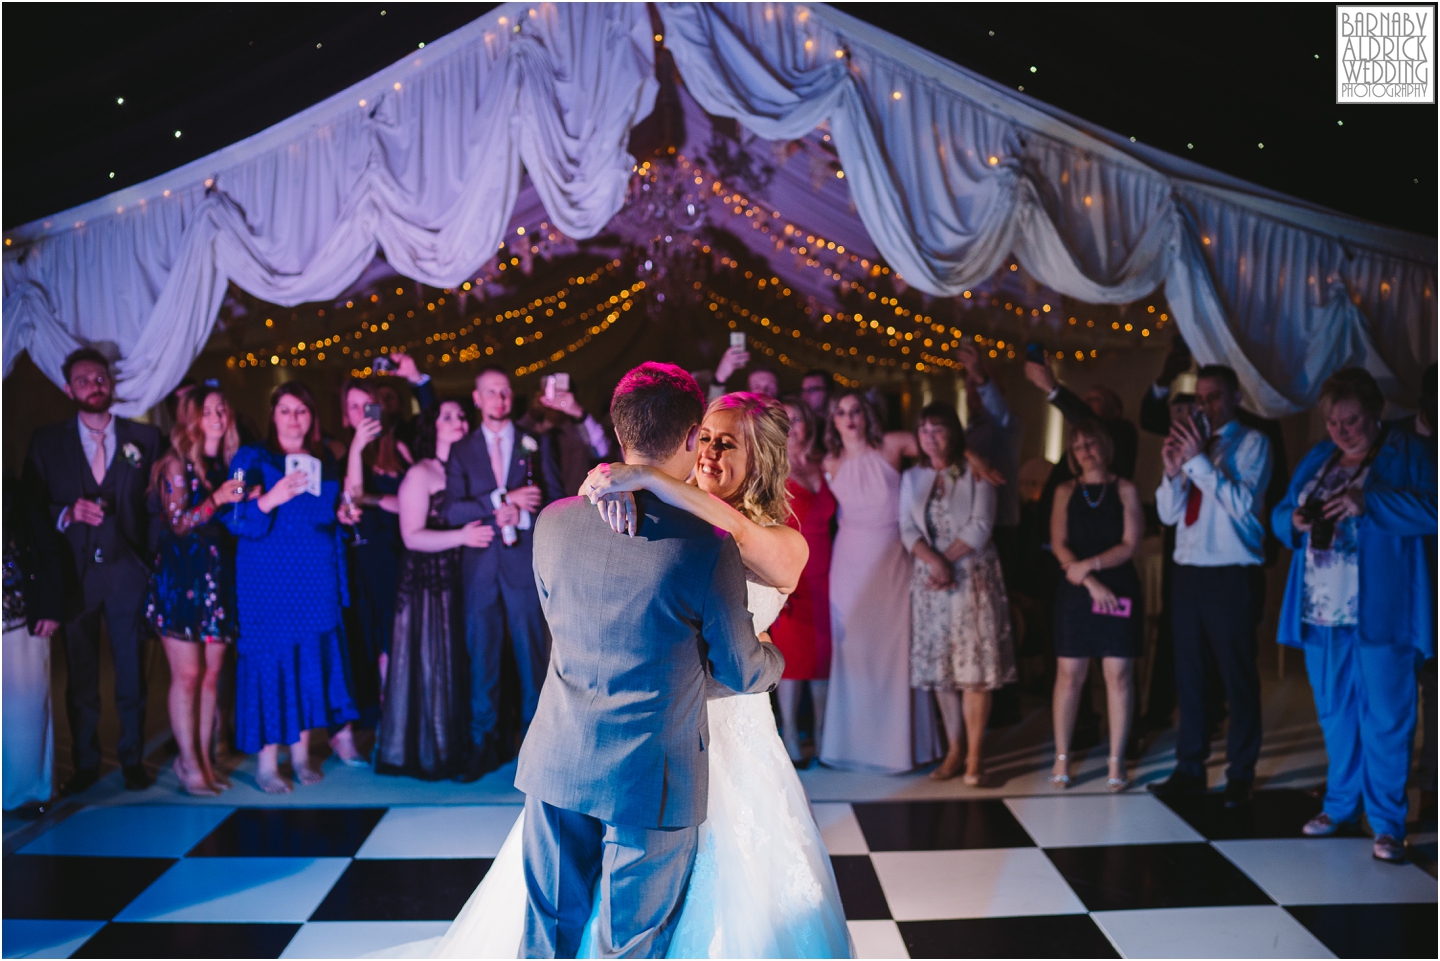 First Dance at Priory Cottages in Yorkshire, Wedding photos at Priory Cottages, The Priory Yorkshire